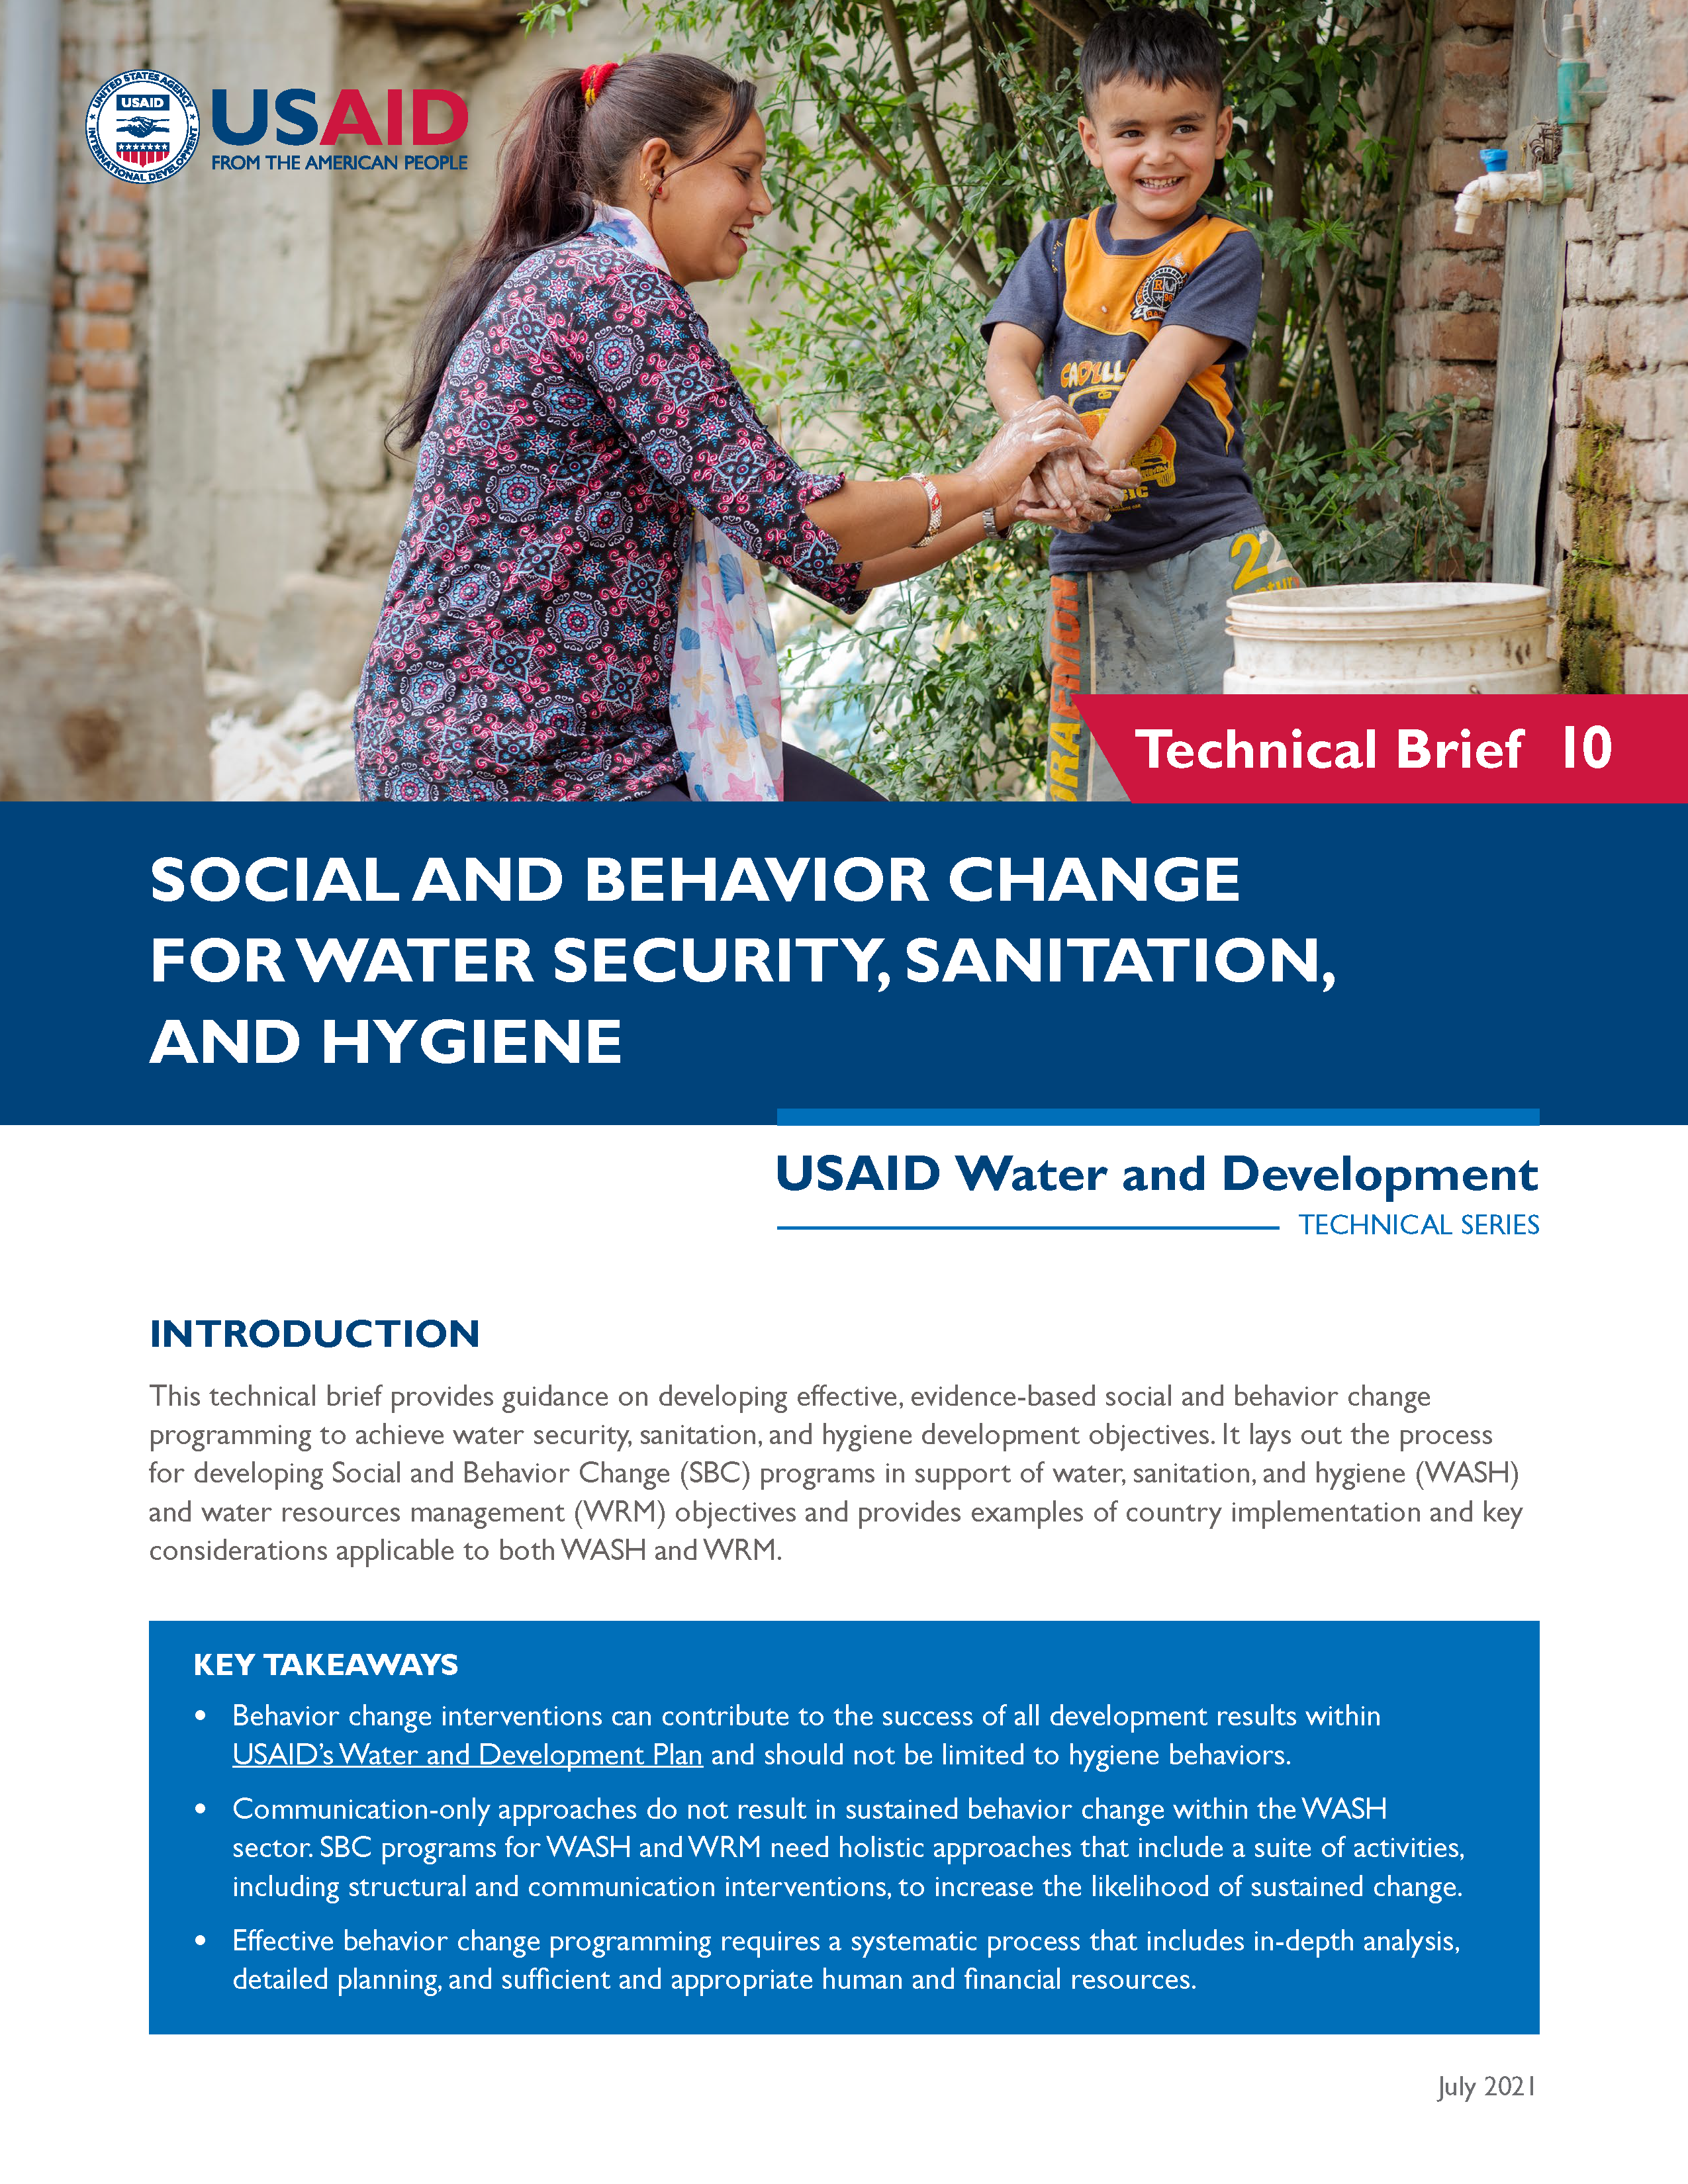 Social and Behavior Change for Water Security, Sanitation, and Hygiene